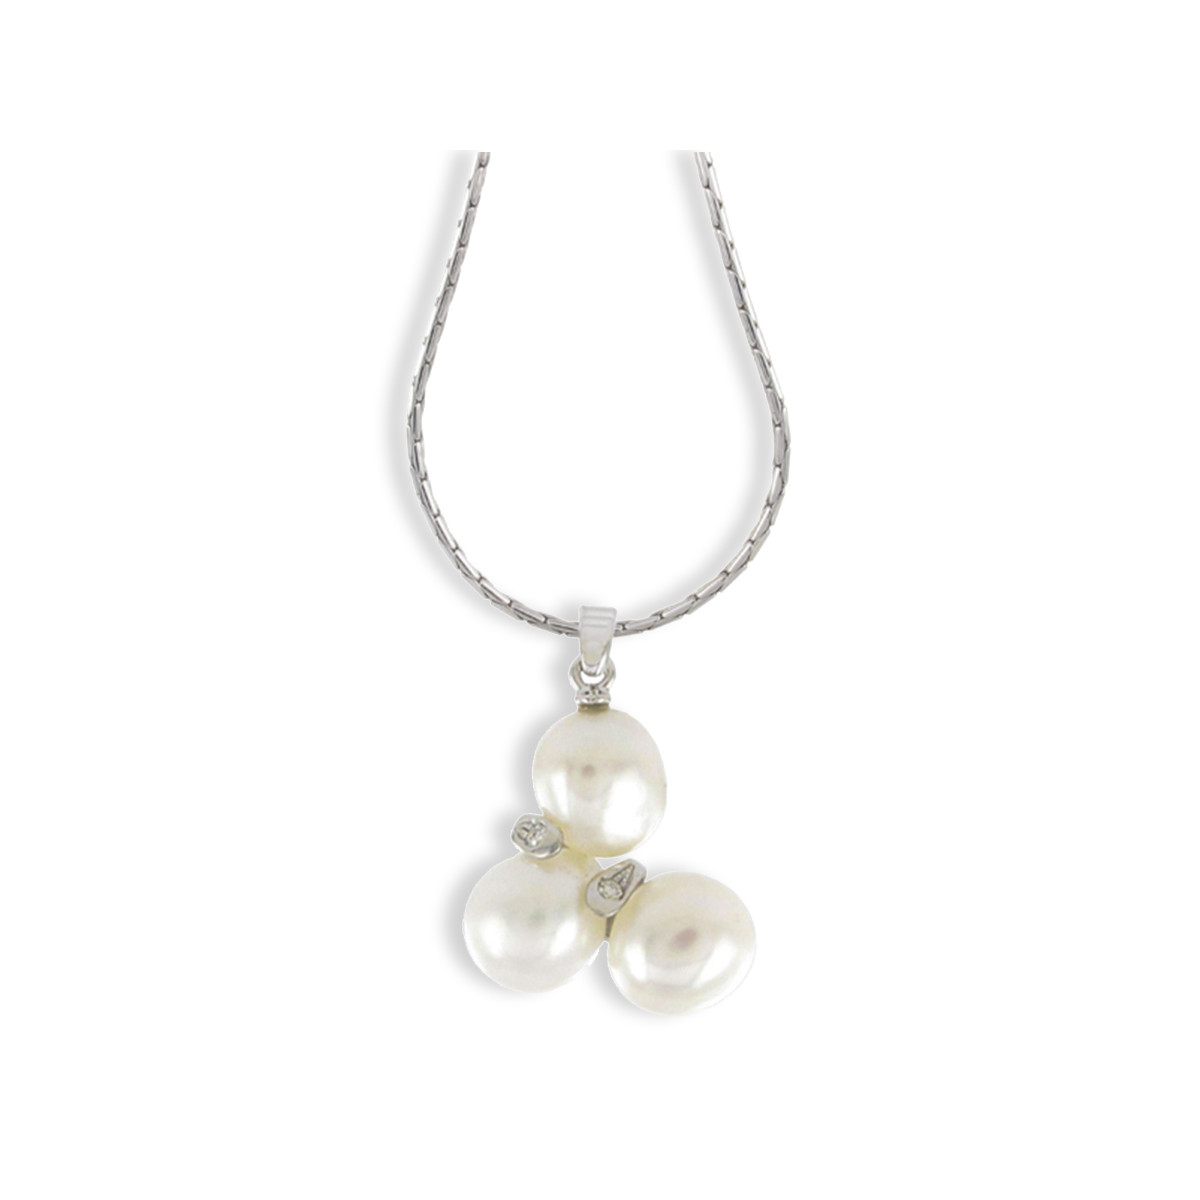 GOLD PEARLS AND DIAMONDS PENDANT